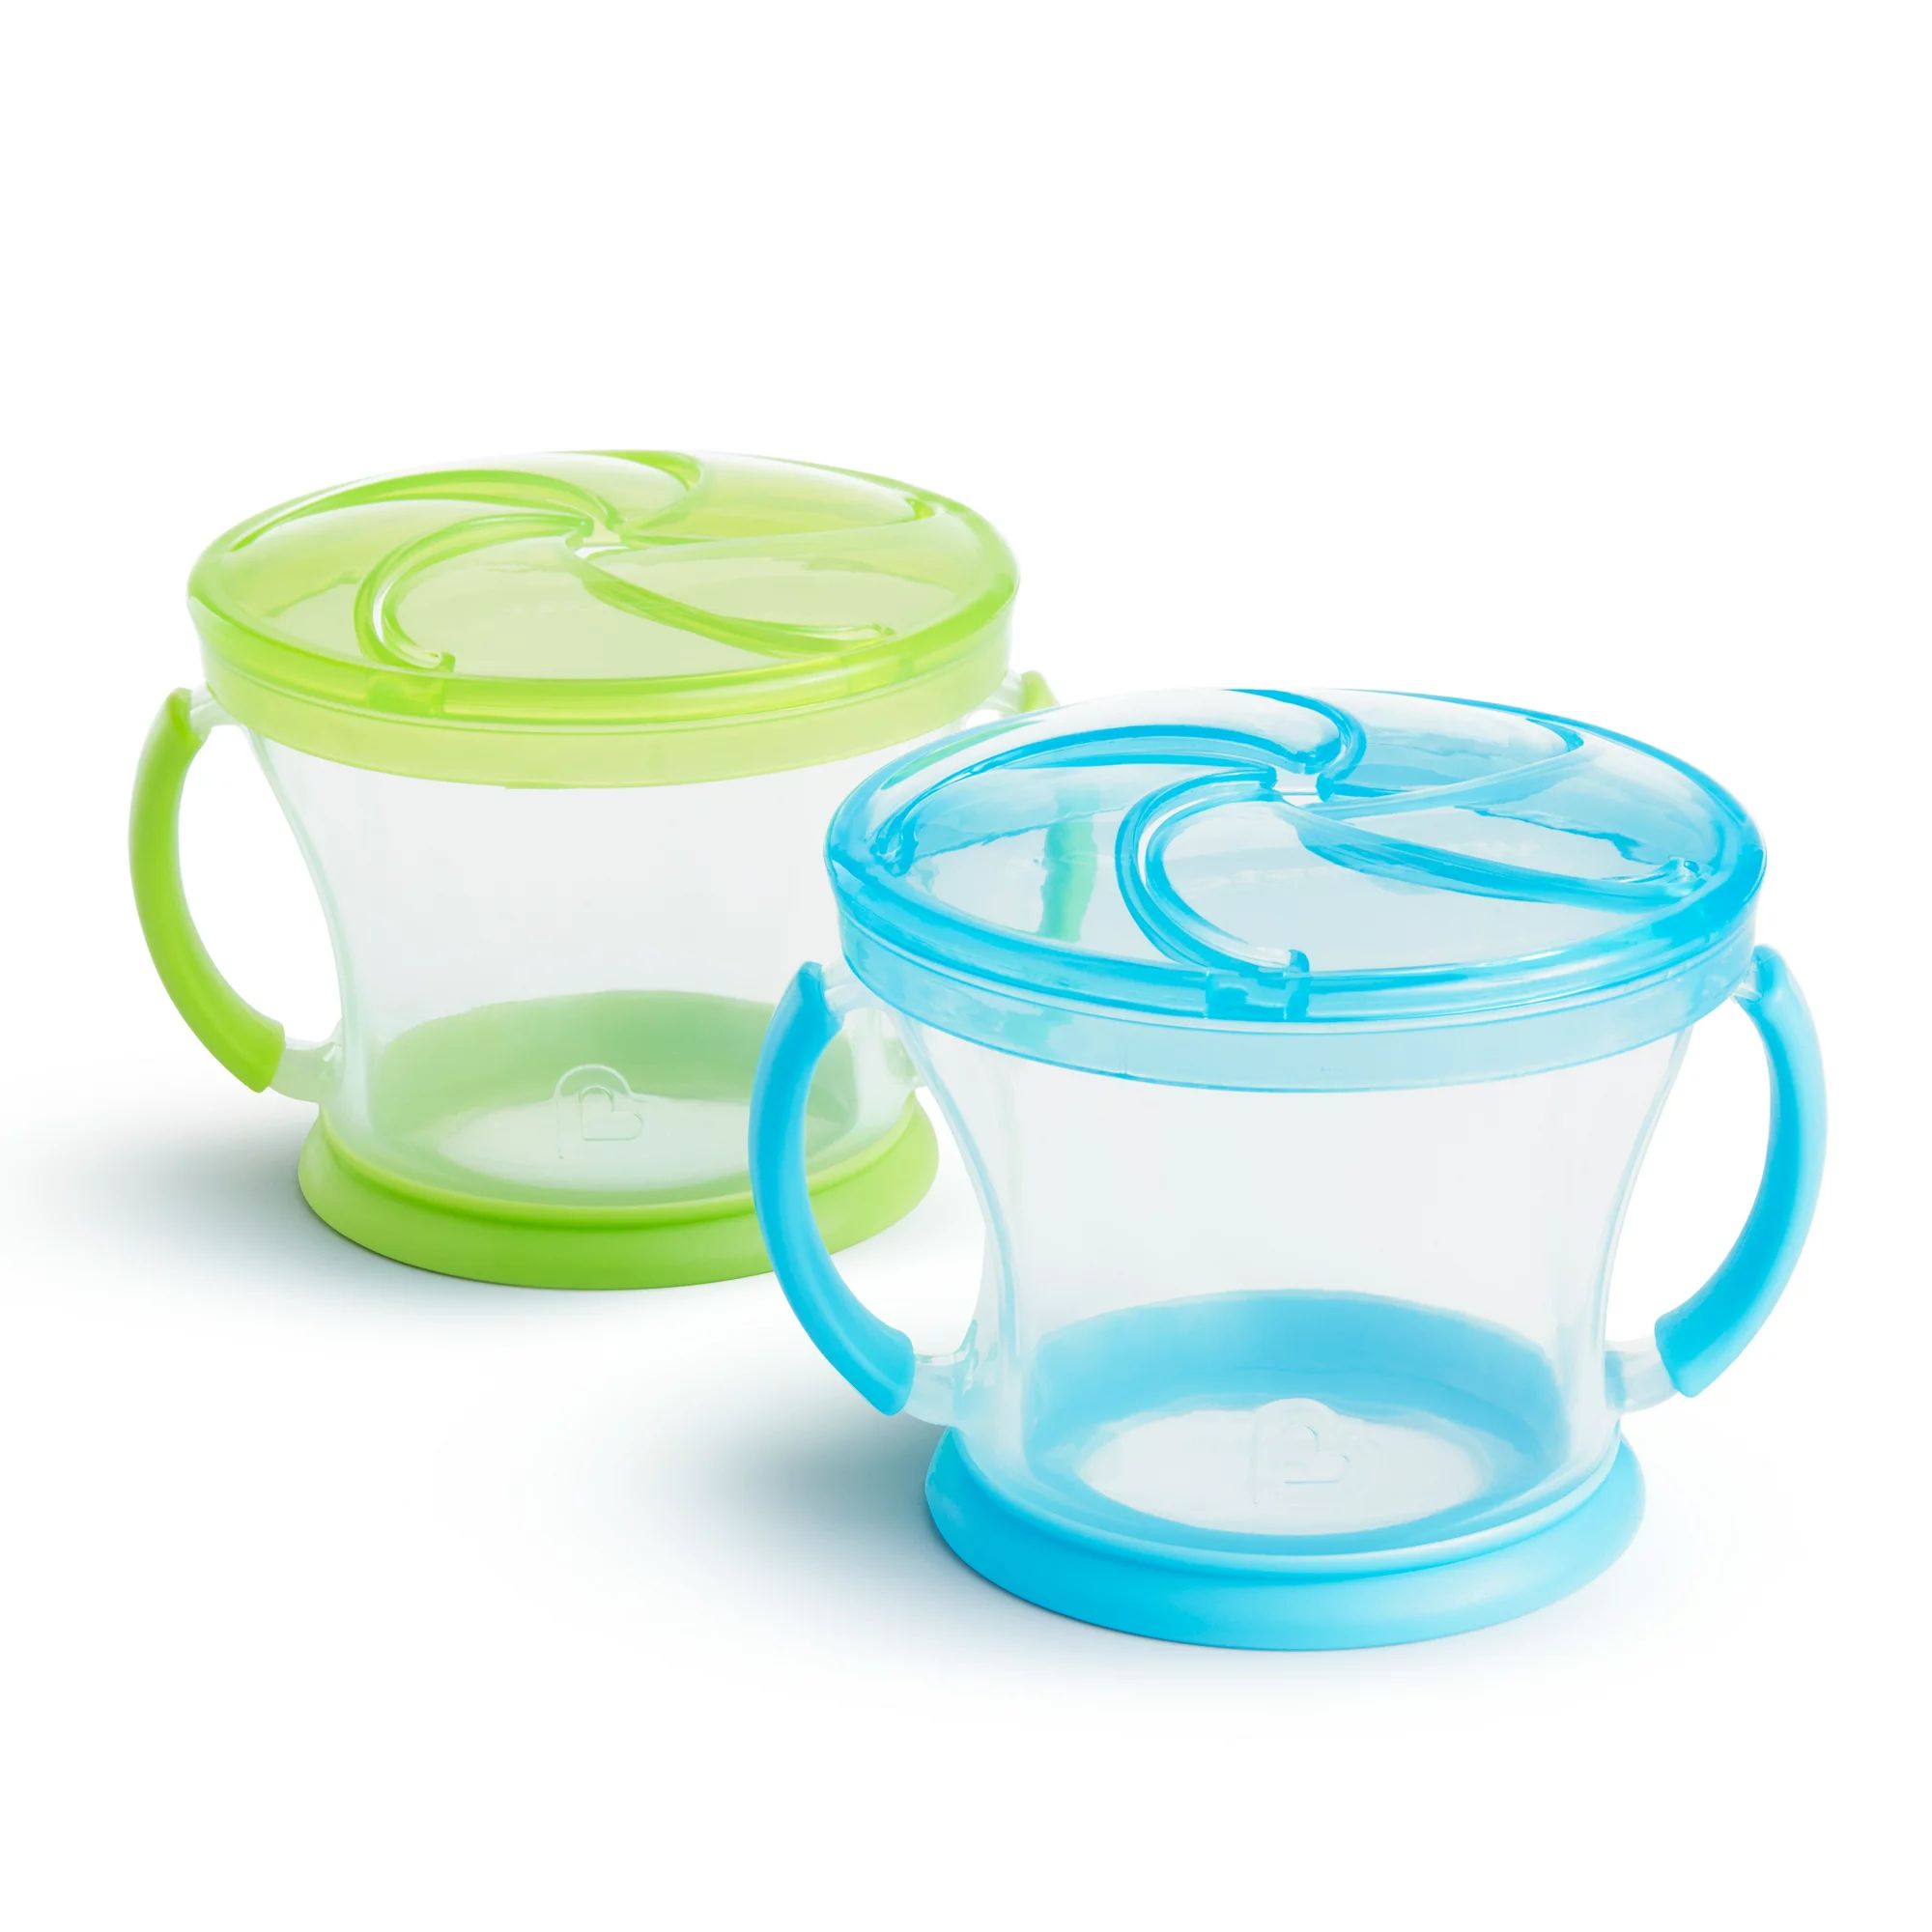 Munchkin Snack Catcher Snack Container Cup, 2 Pack, Blue/Green | Walmart (US)